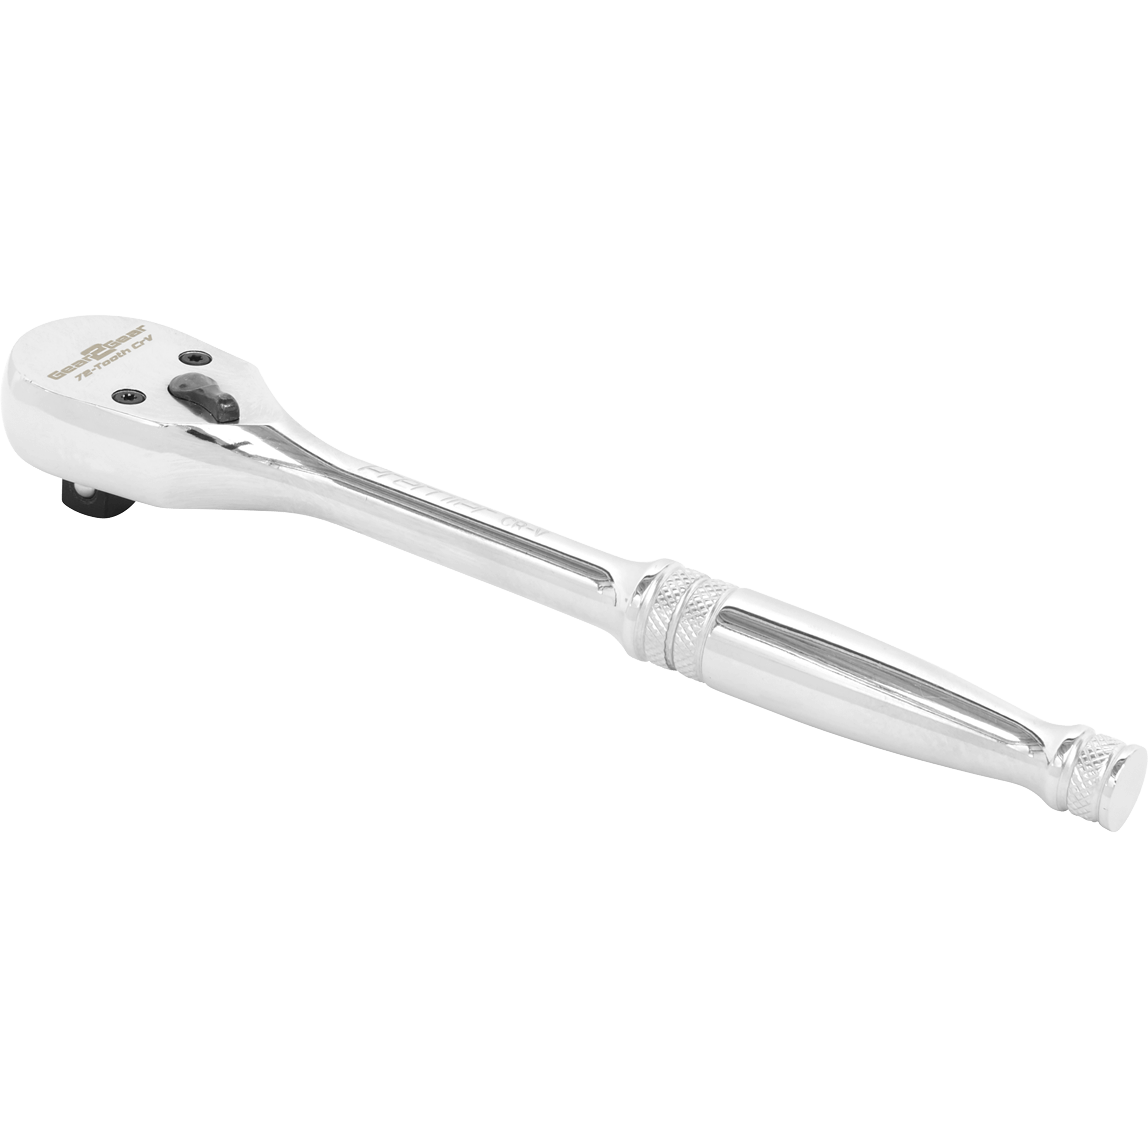 Photos - Hand Ratchet Sealey AK661DF 3/8" Drive Pear Head Ratchet Wrench 3/8" 